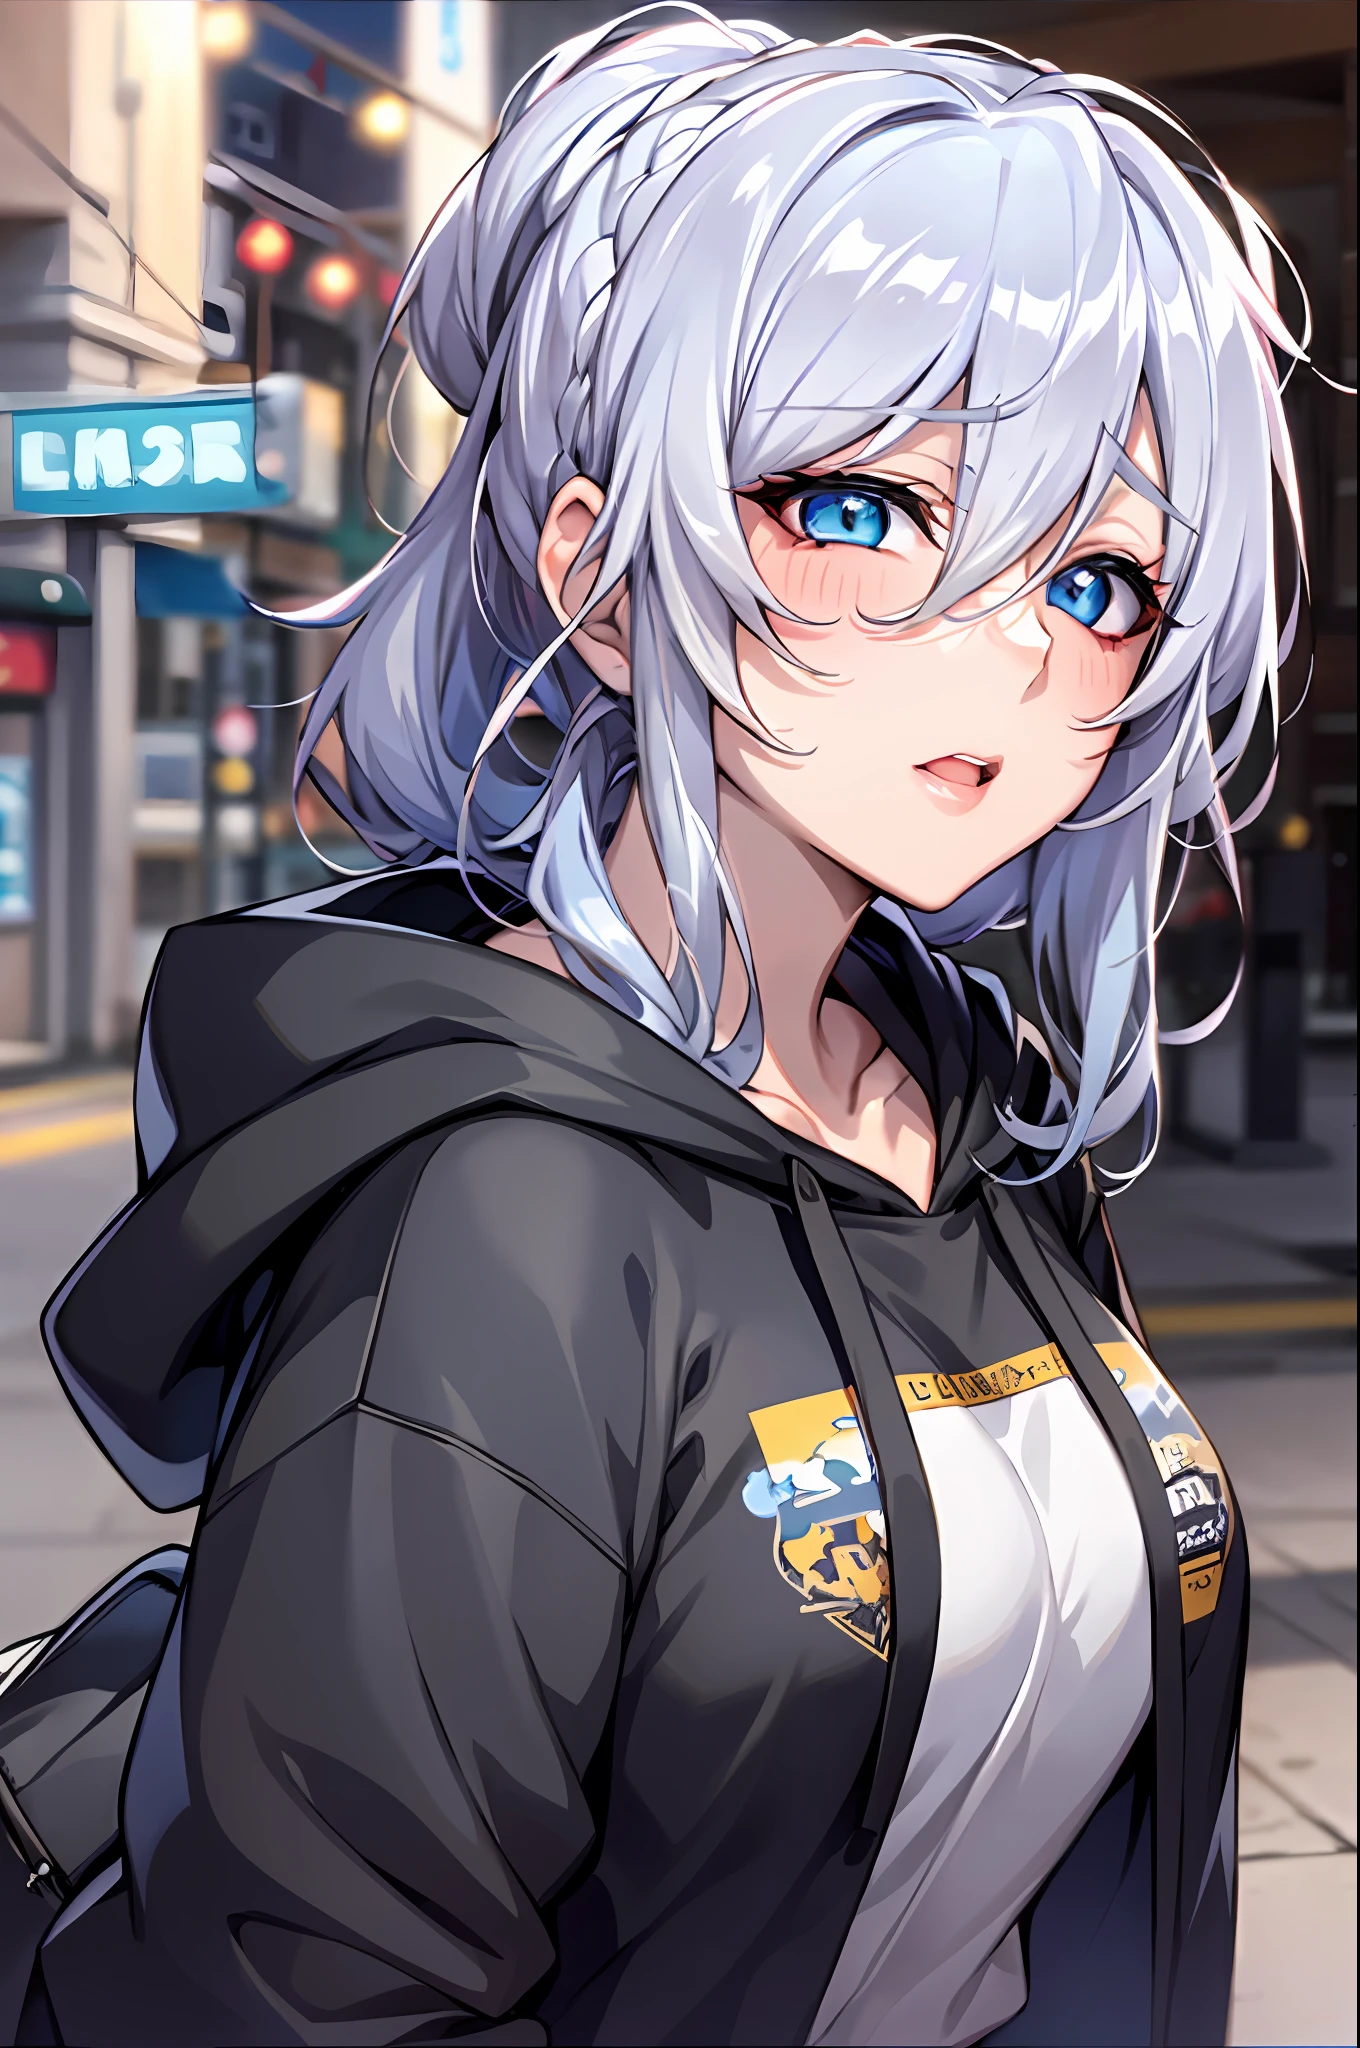 Silver hair and  eyes in a black hoodie, anime visual of a cute girl, screenshot from the anime film, & her expression is solemn, ahegao face, in the anime film, in an anime, anime visual of a young woman, she has a cute expressive face, still from anime